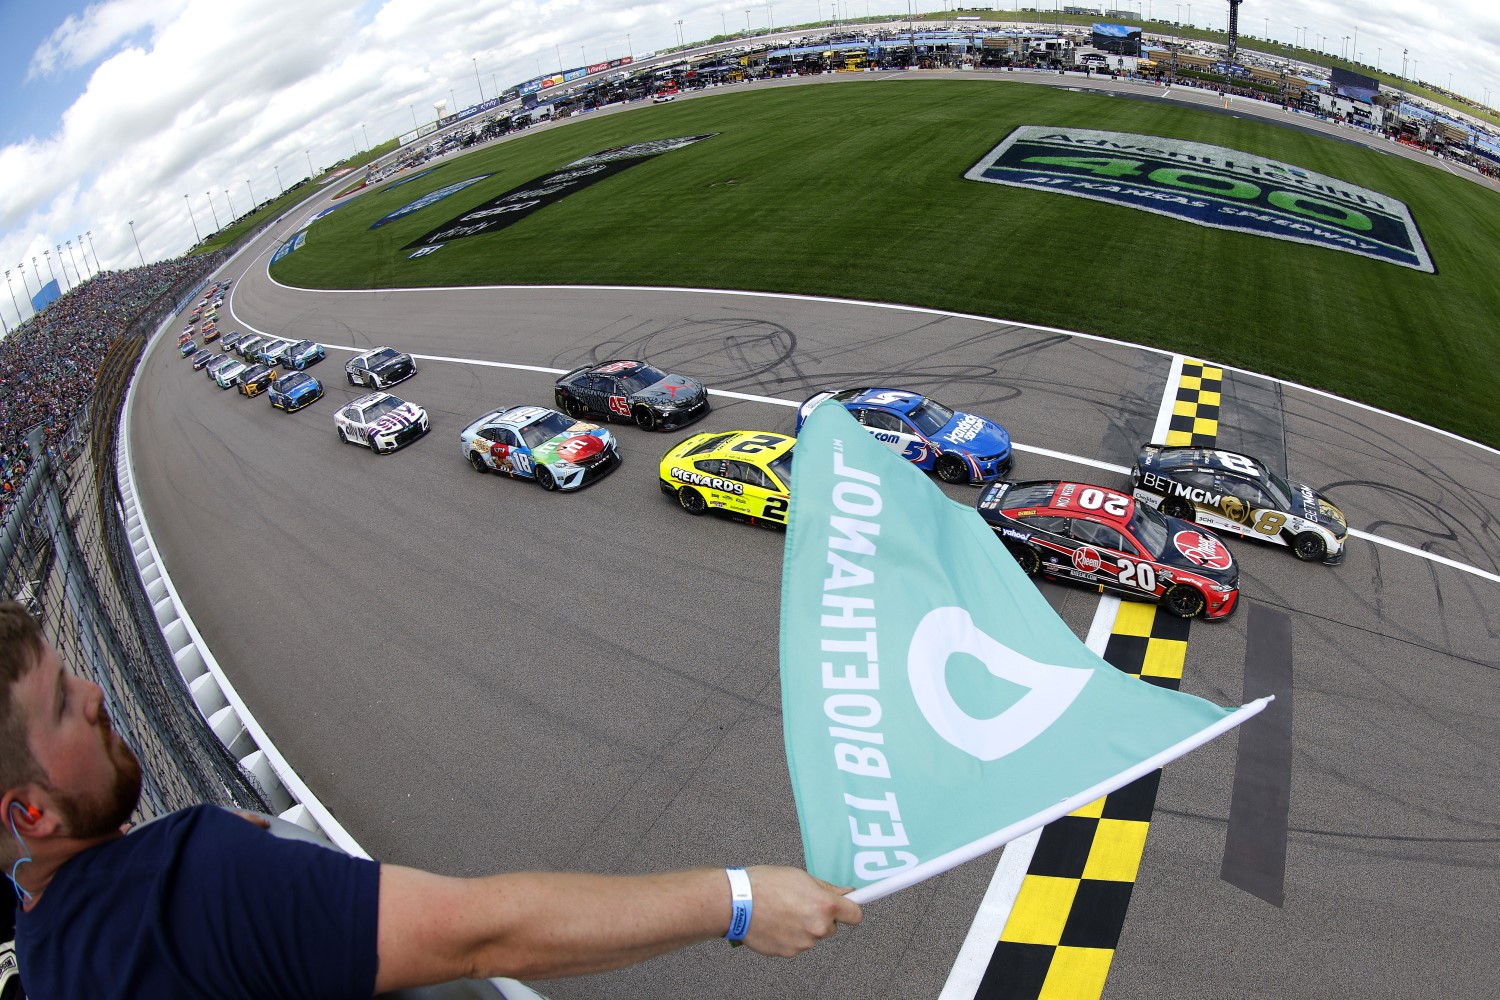 Christopher Bell, driver of the #20 Rheem Toyota, leads the field to the green flag to start the NASCAR Cup Series AdventHealth 400 at Kansas Speedway on May 15, 2022 in Kansas City, Kansas. (Photo by Sean Gardner/Getty Images)